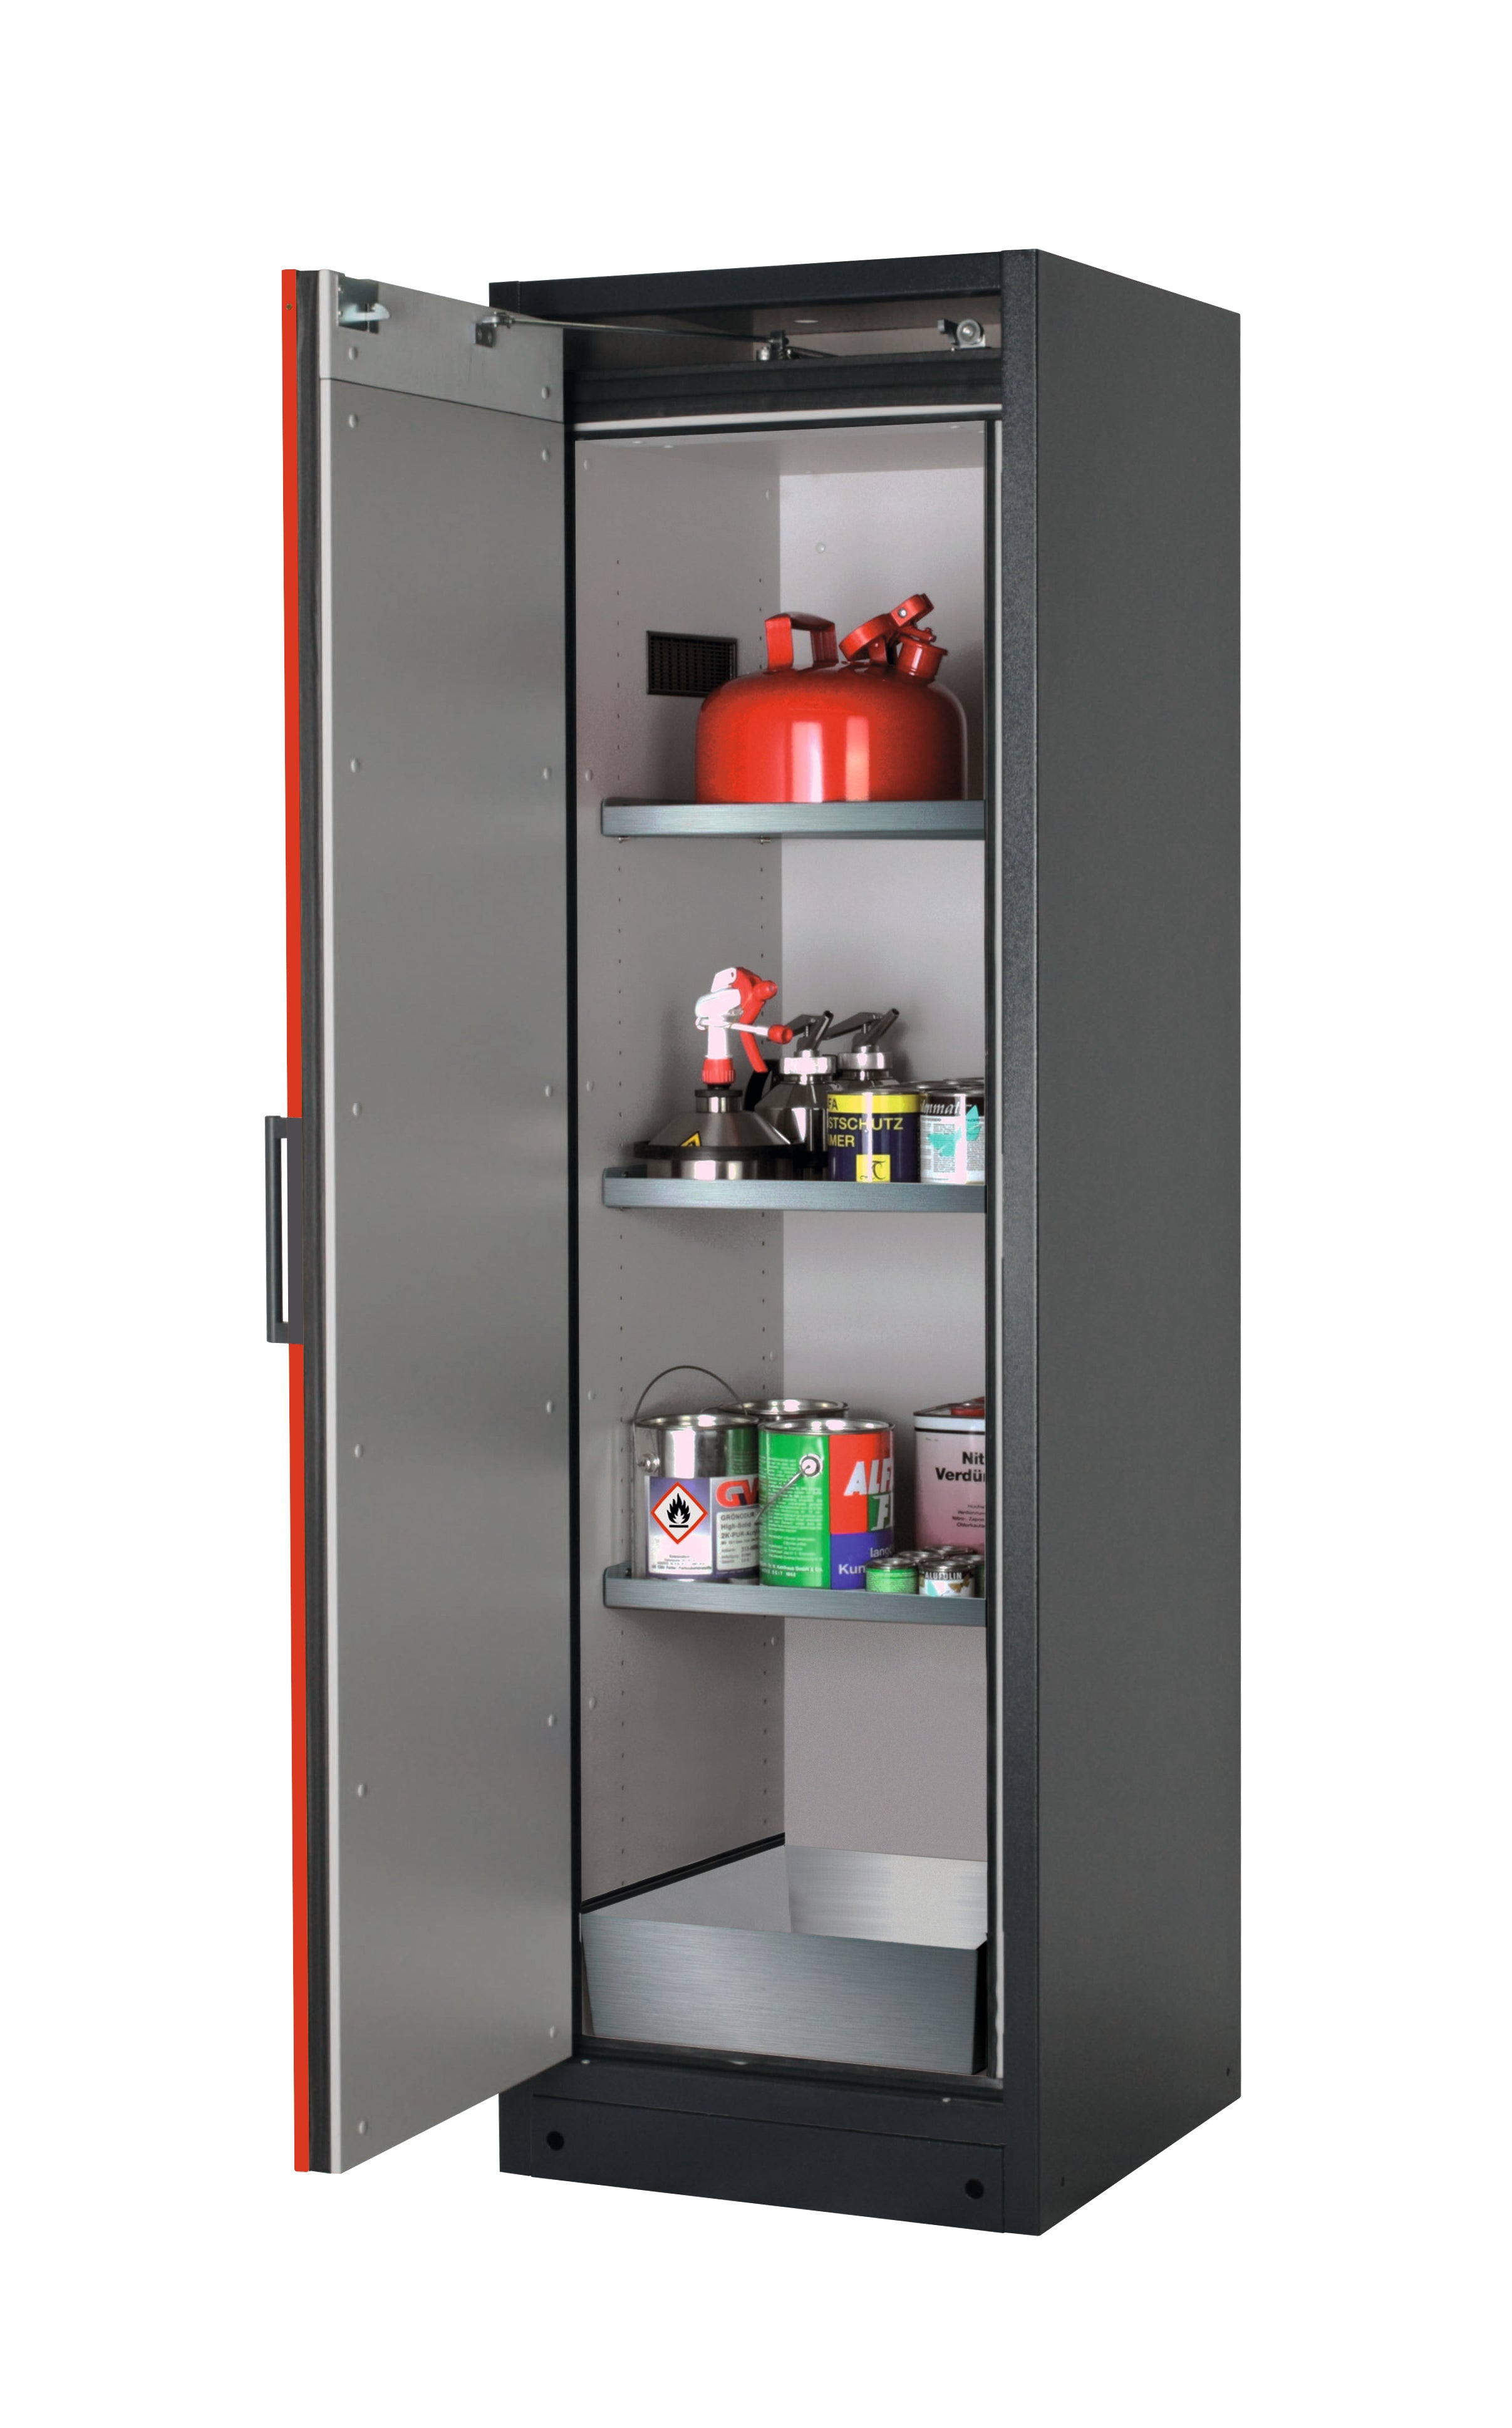 Type 90 safety storage cabinet Q-PEGASUS-90 model Q90.195.060.WDAC in traffic red RAL 3020 with 3x shelf standard (stainless steel 1.4301),